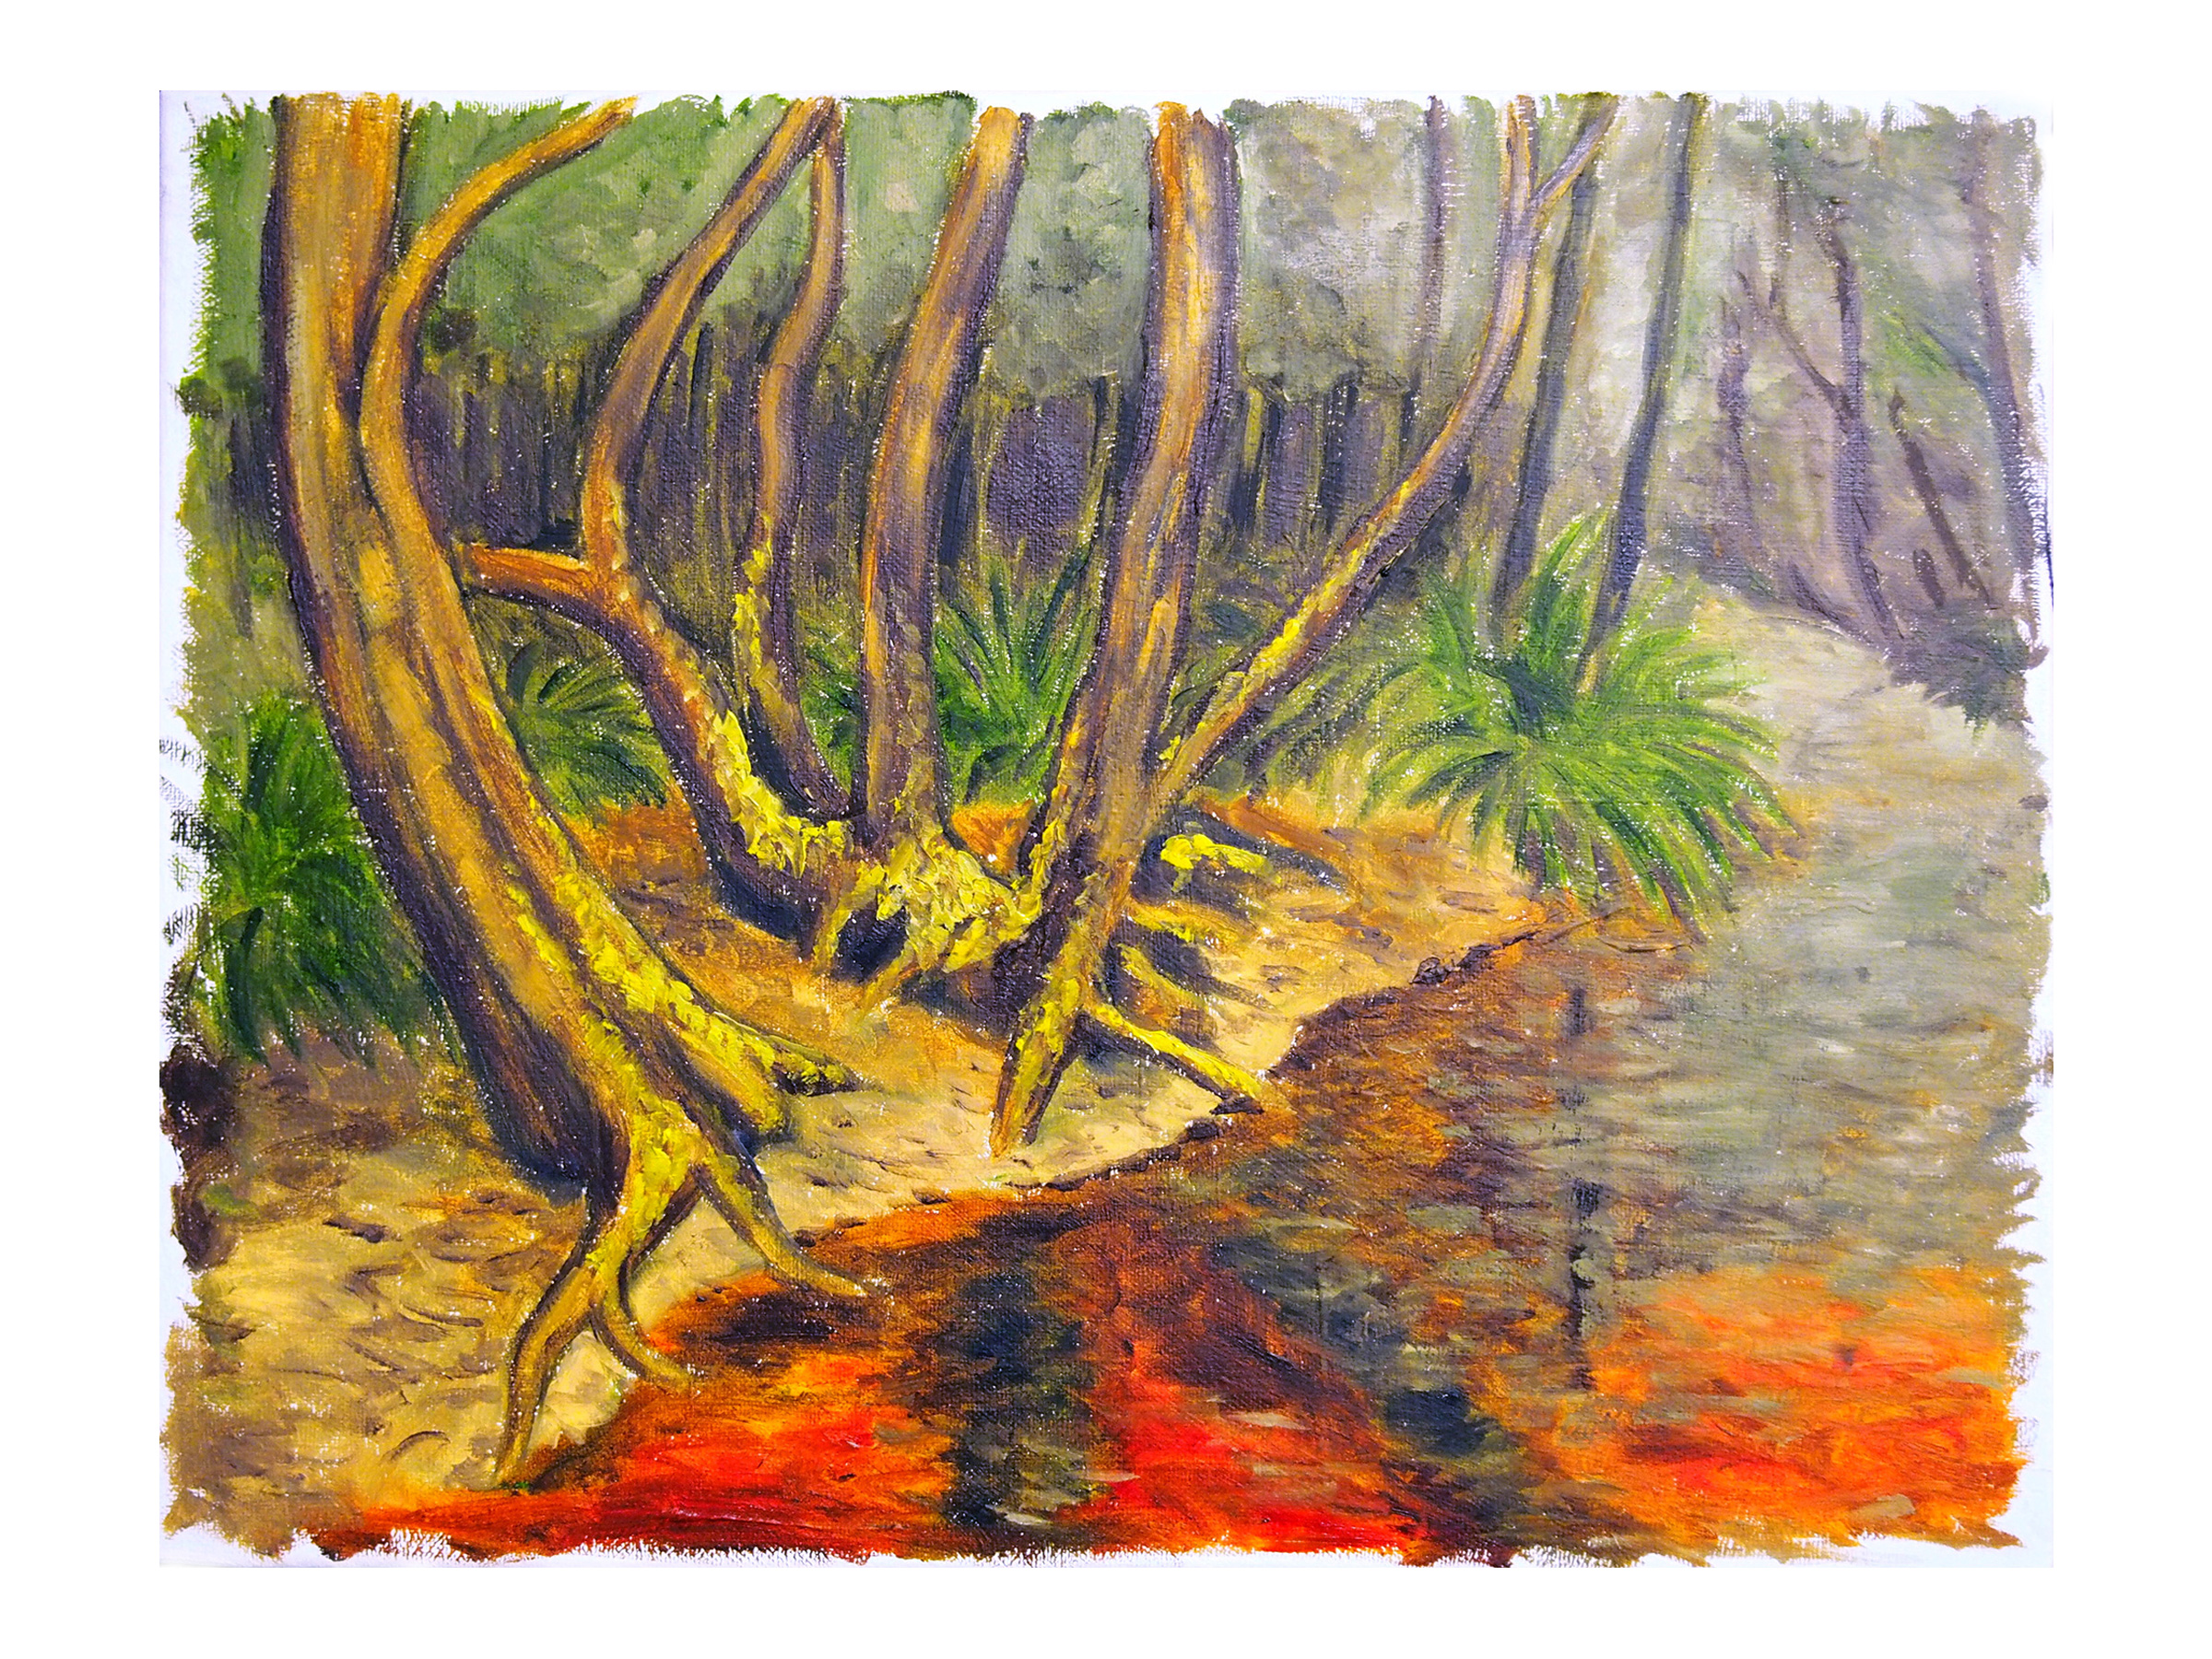 Robyn Varpins, Donnelly River, Study 3